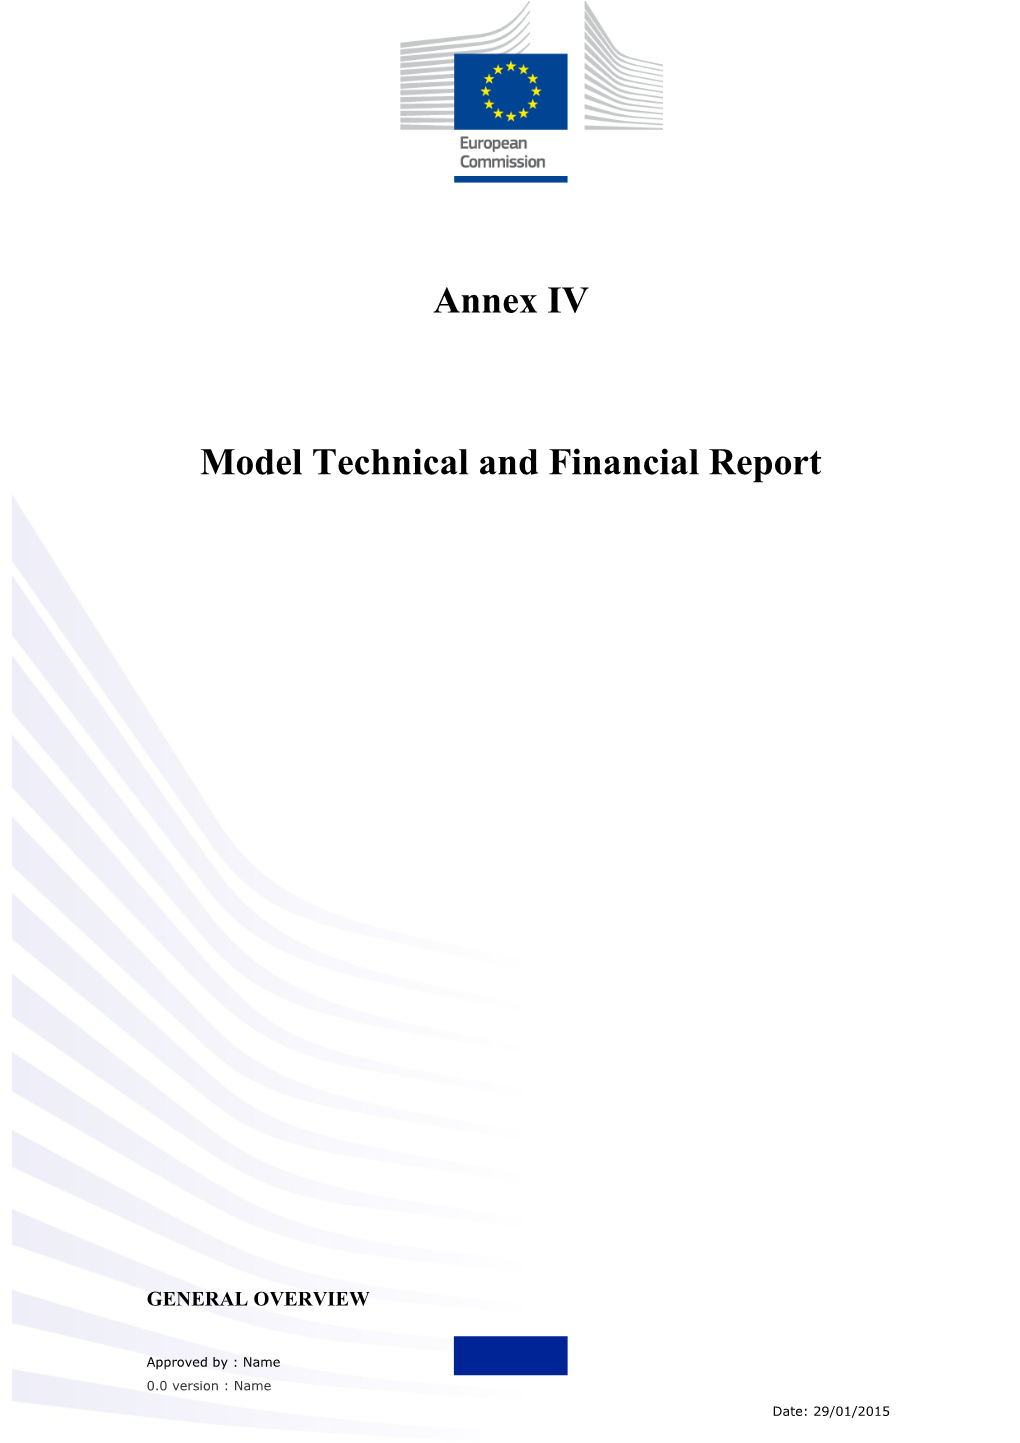 Model Technical and Financial Report